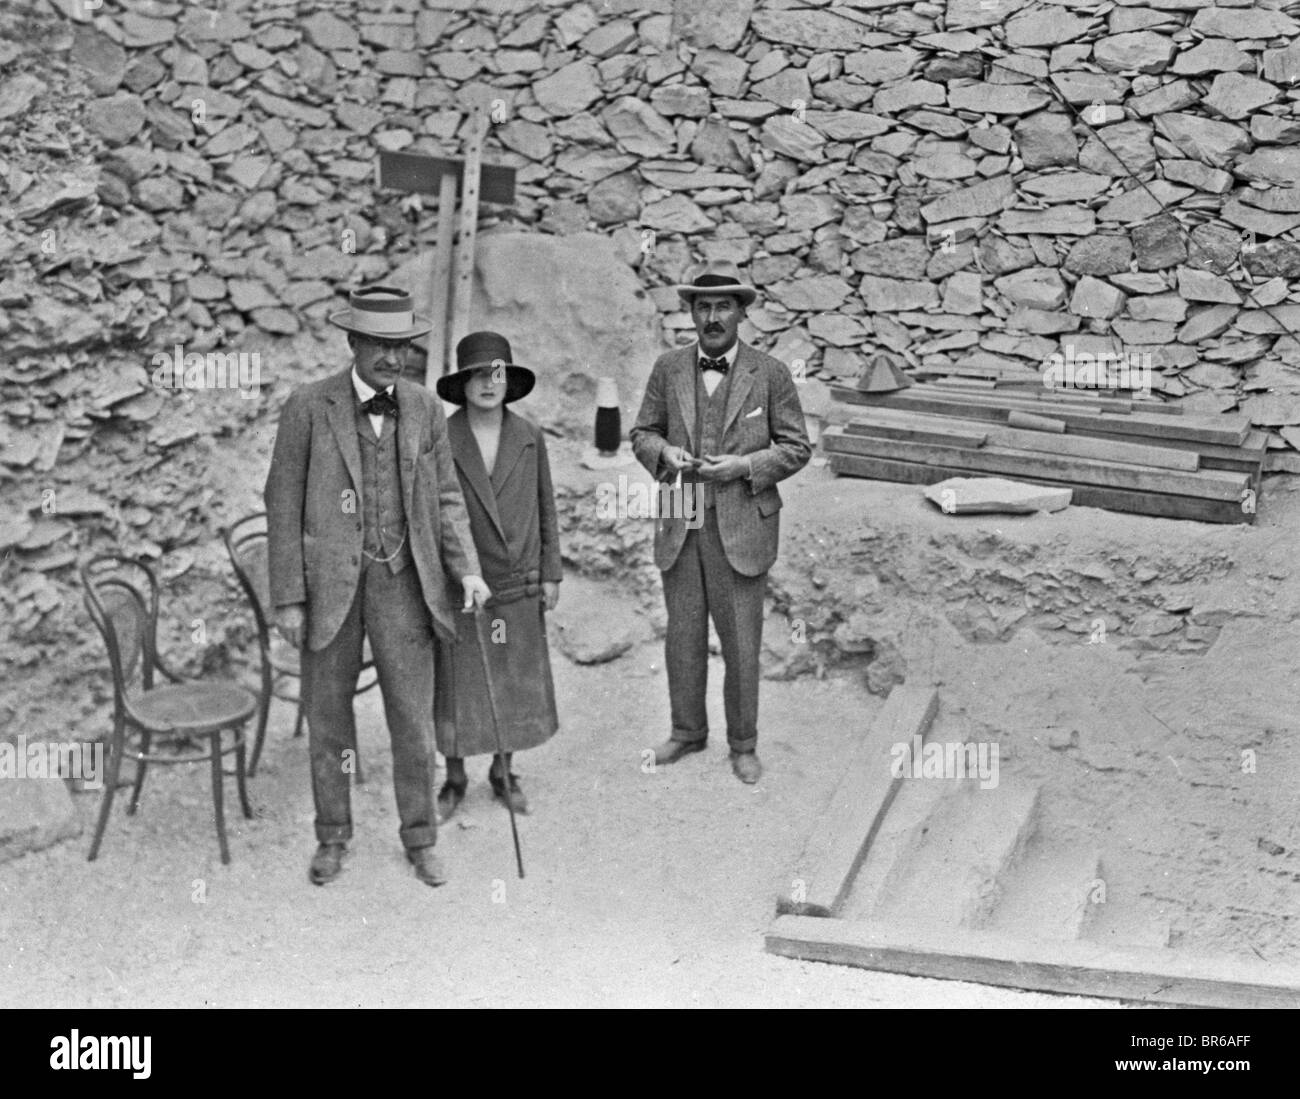 Howard Carter discovered Tutankhamun's tomb in the Valley of the Kings, near Luxor in Egypt in November 1922 with Lord and Lady Carnarvon. Scanned from image material in the archive of Press Portrait Service (formerly Press Portrait Bureau) Stock Photo